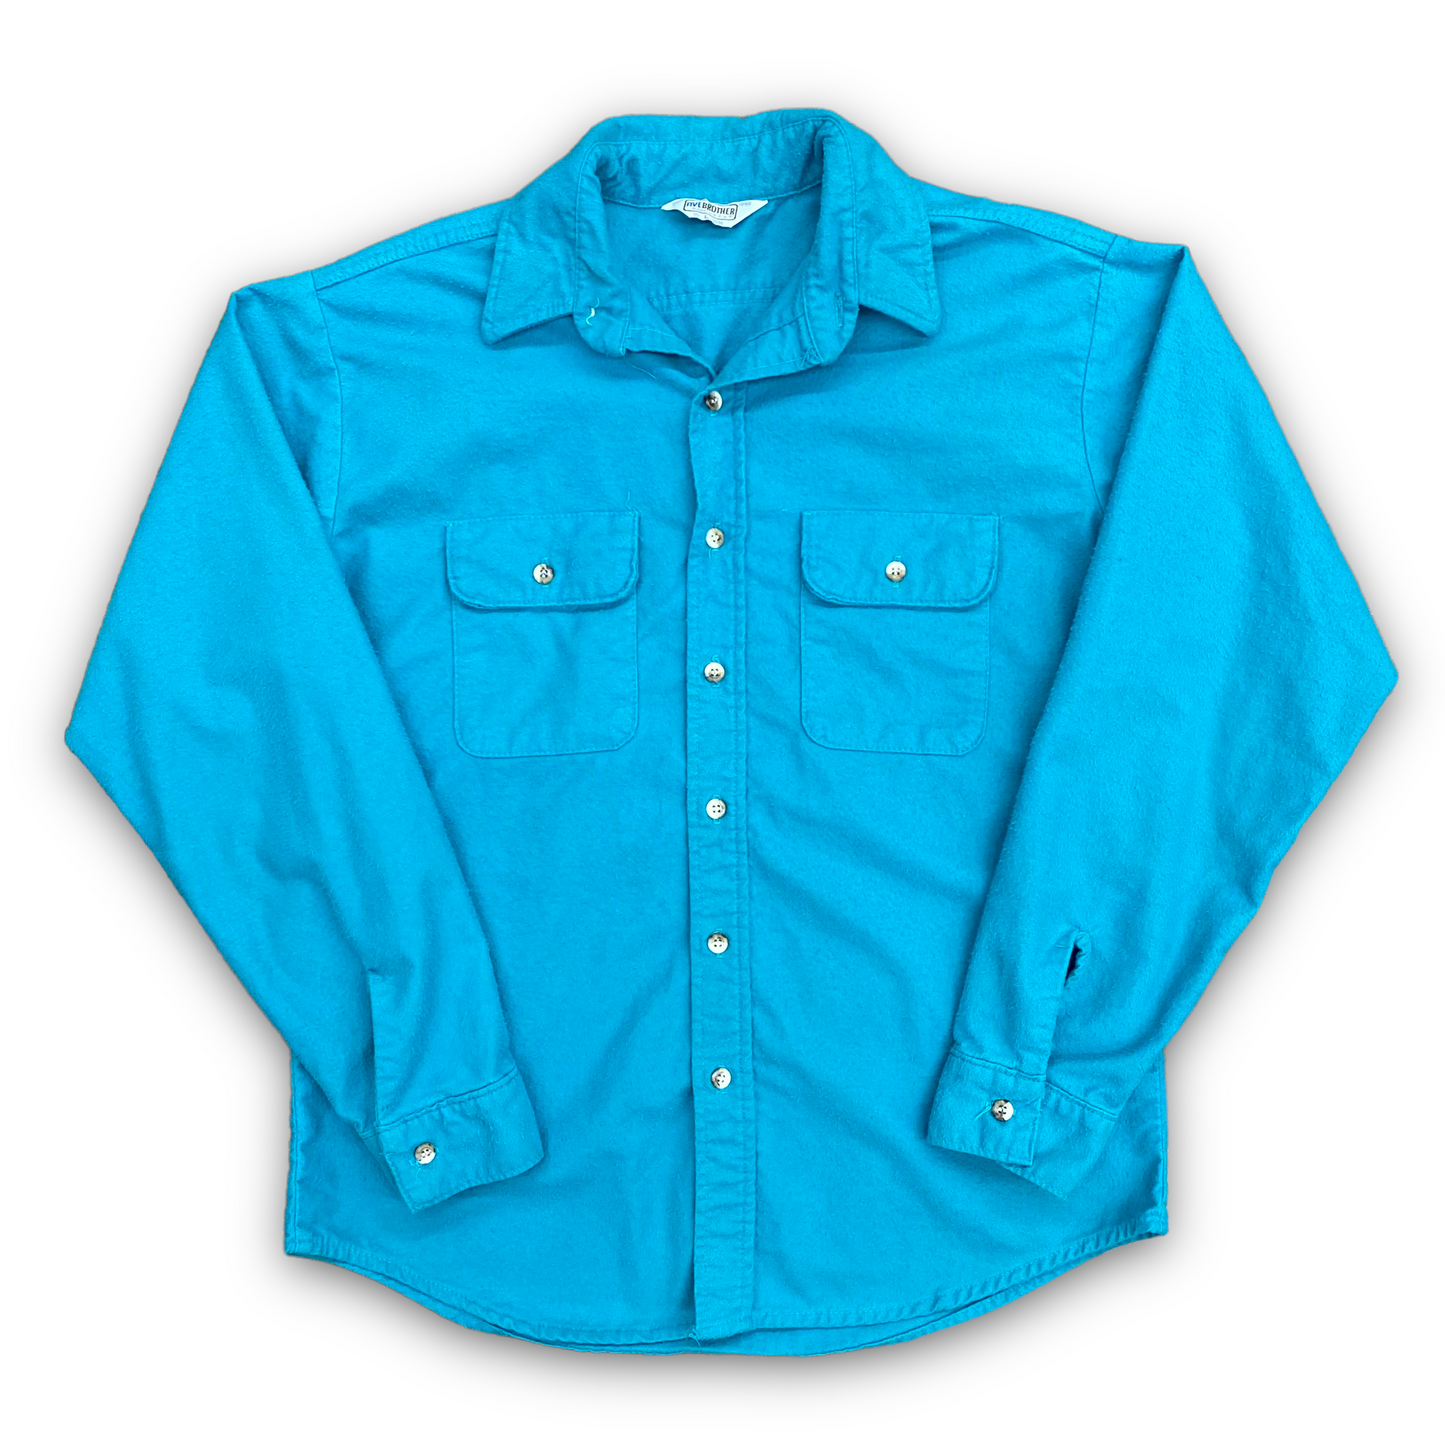 Vintage Five Brother Teal Chambray Button Up - Size Large